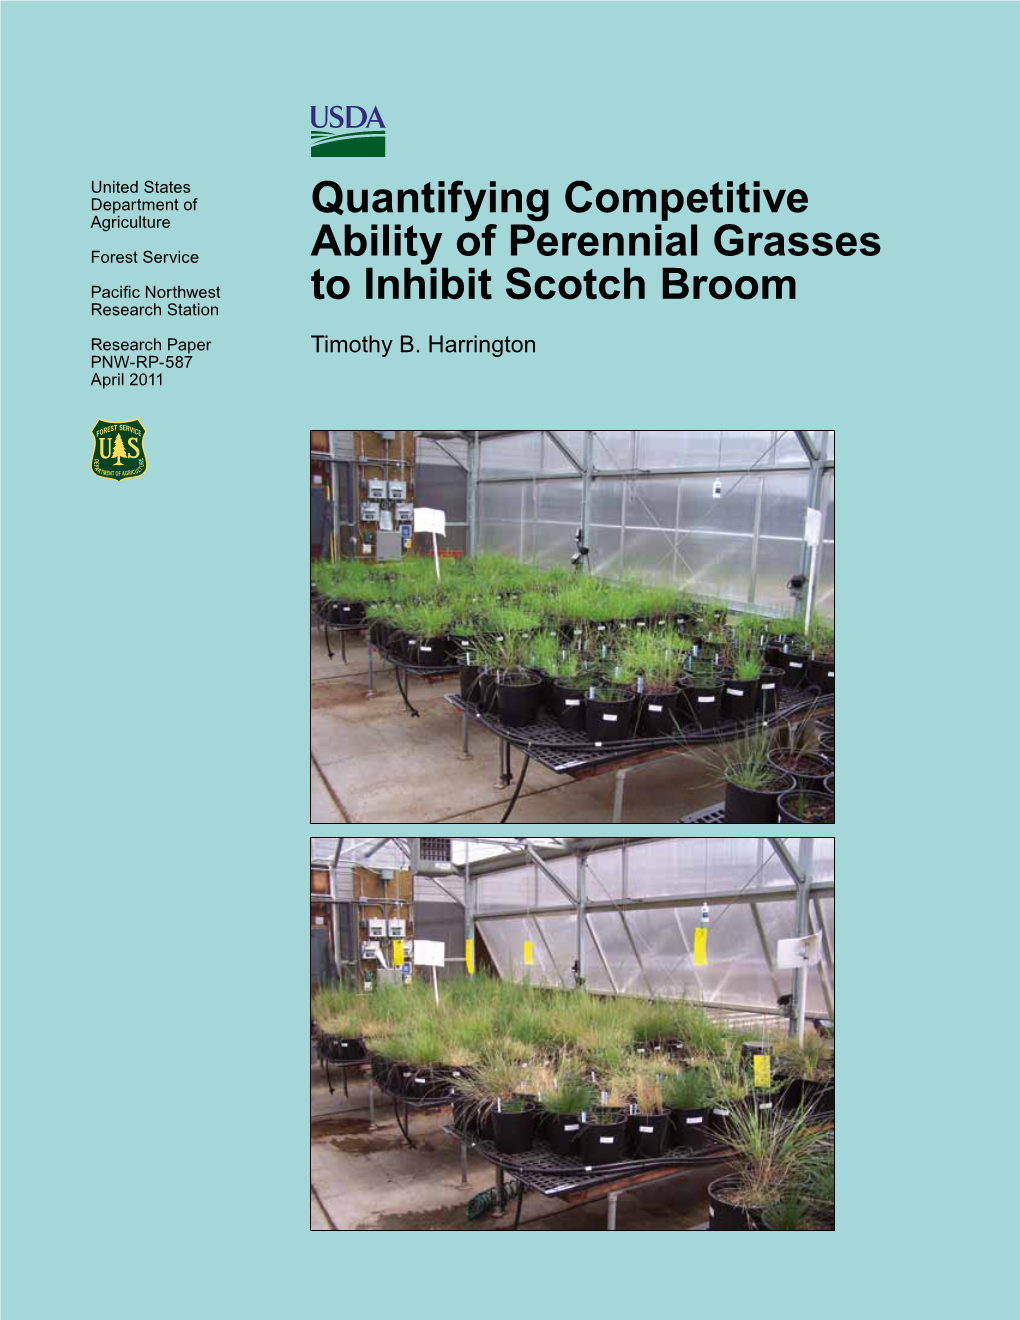 Quantifying Competitive Ability of Perennial Grasses to Inhibit Scotch Broom